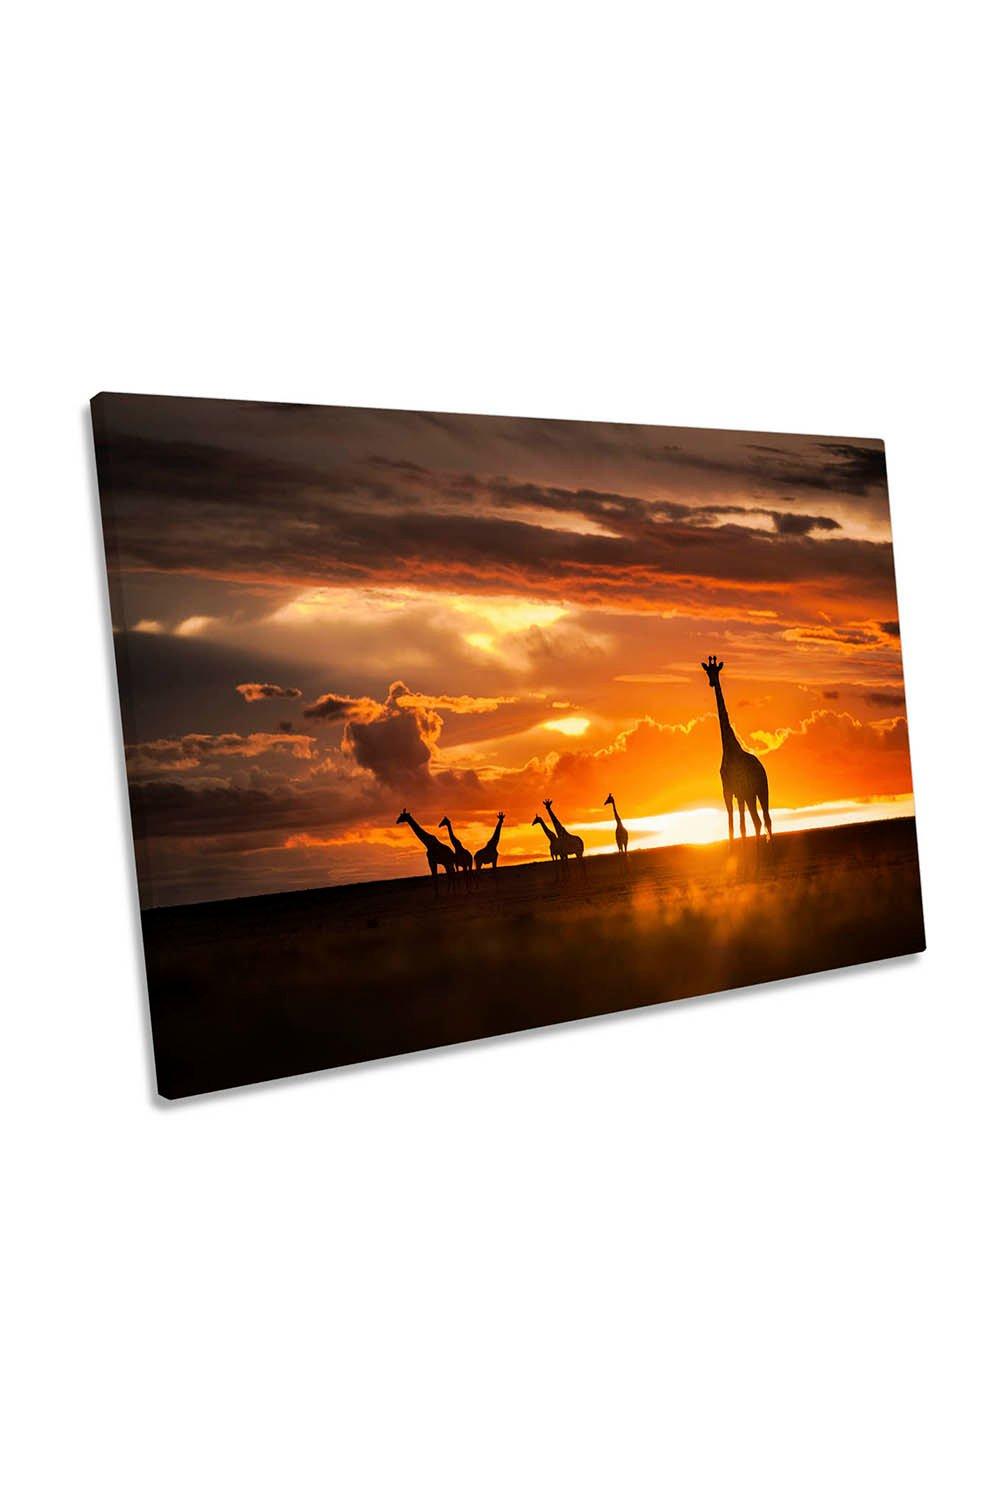 End of the Day Giraffes Sunset Orange Canvas Wall Art Picture Print